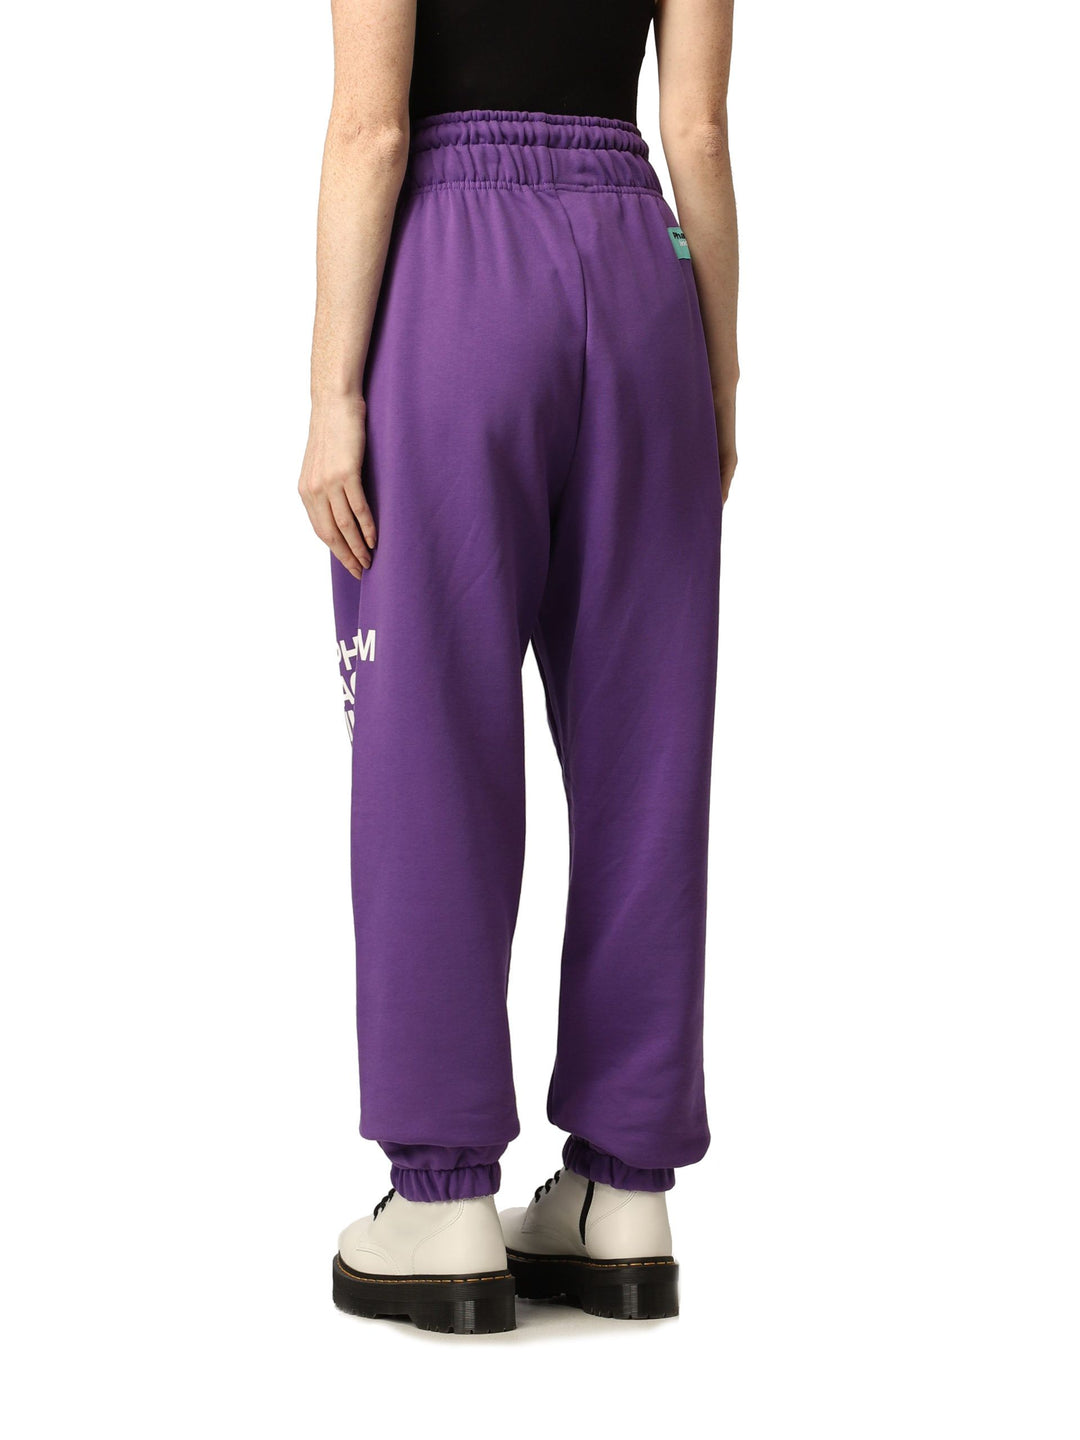 Pharmacy Industry Chic Purple Logo Tracksuit Trousers